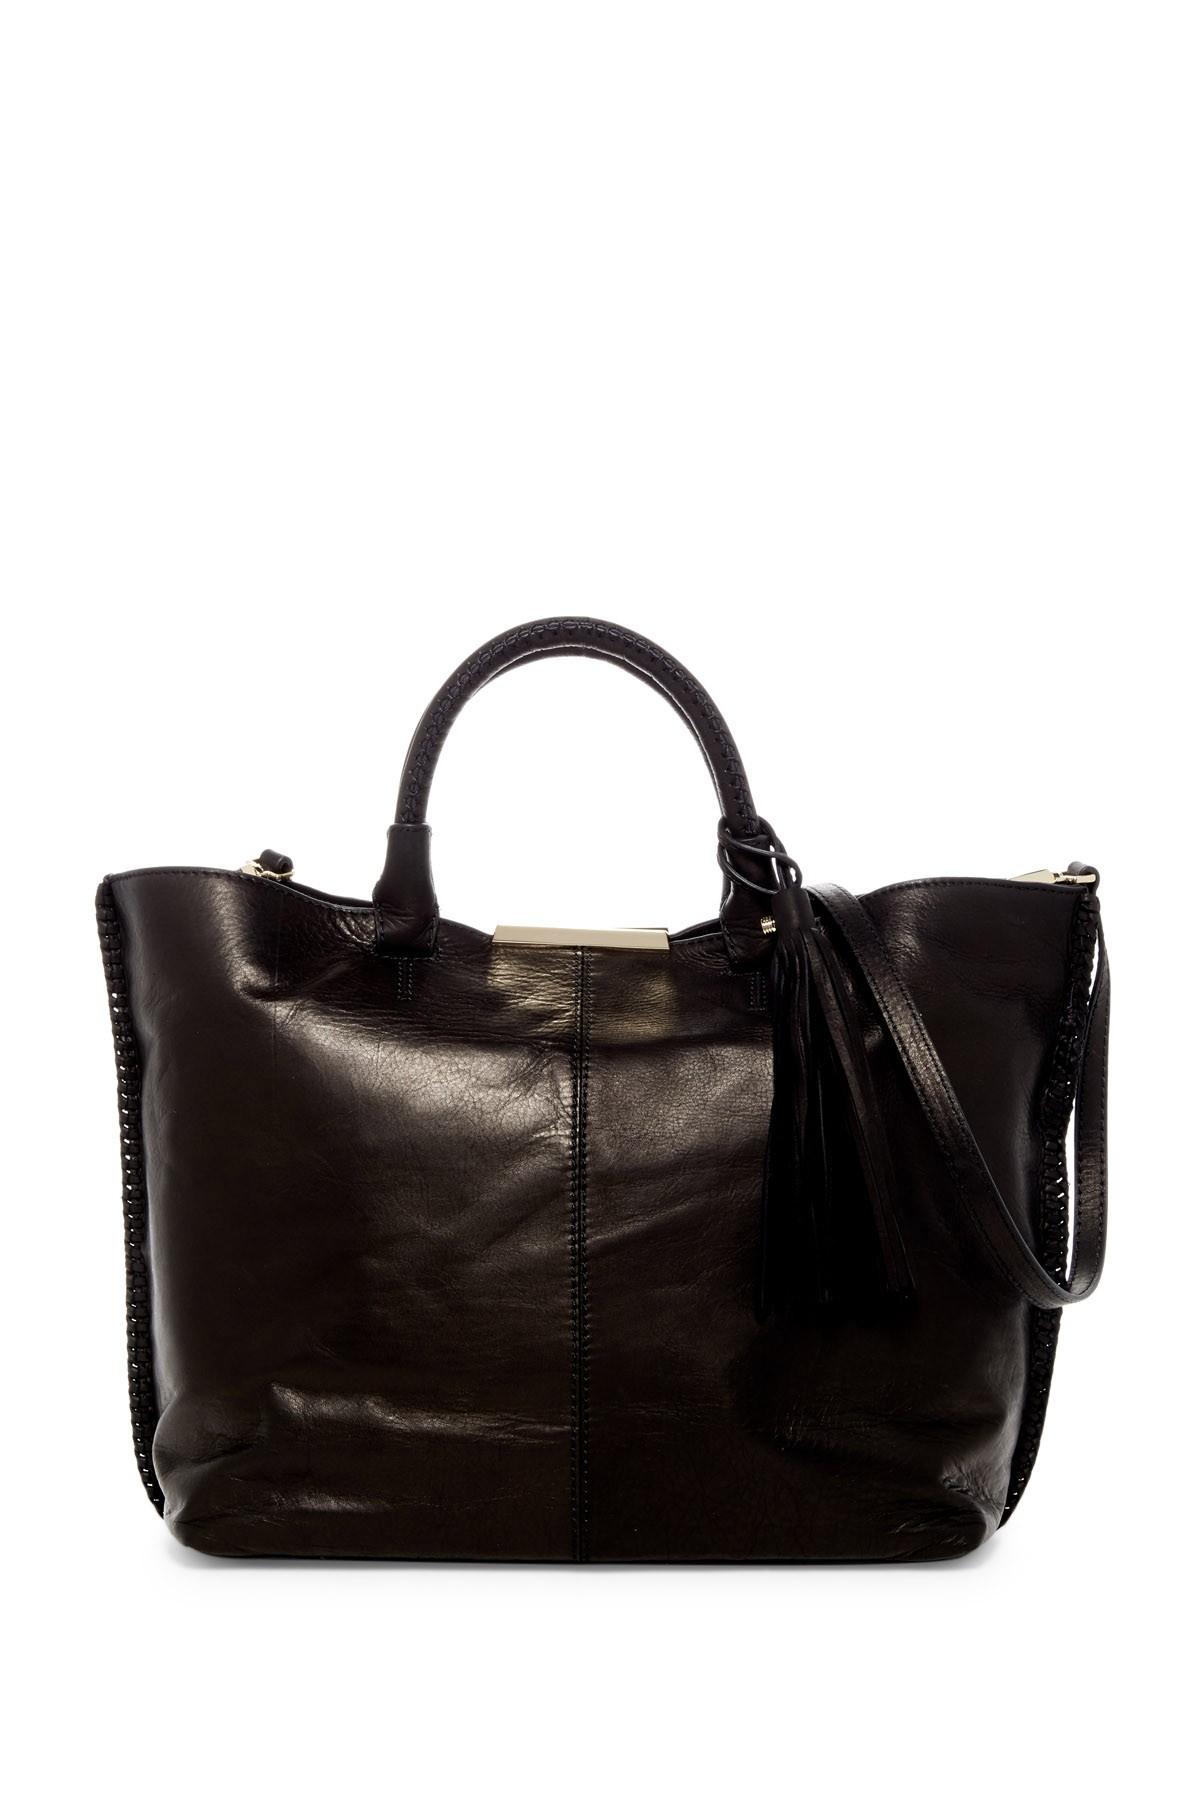 Botkier Quincy Leather Tote in Black - Lyst